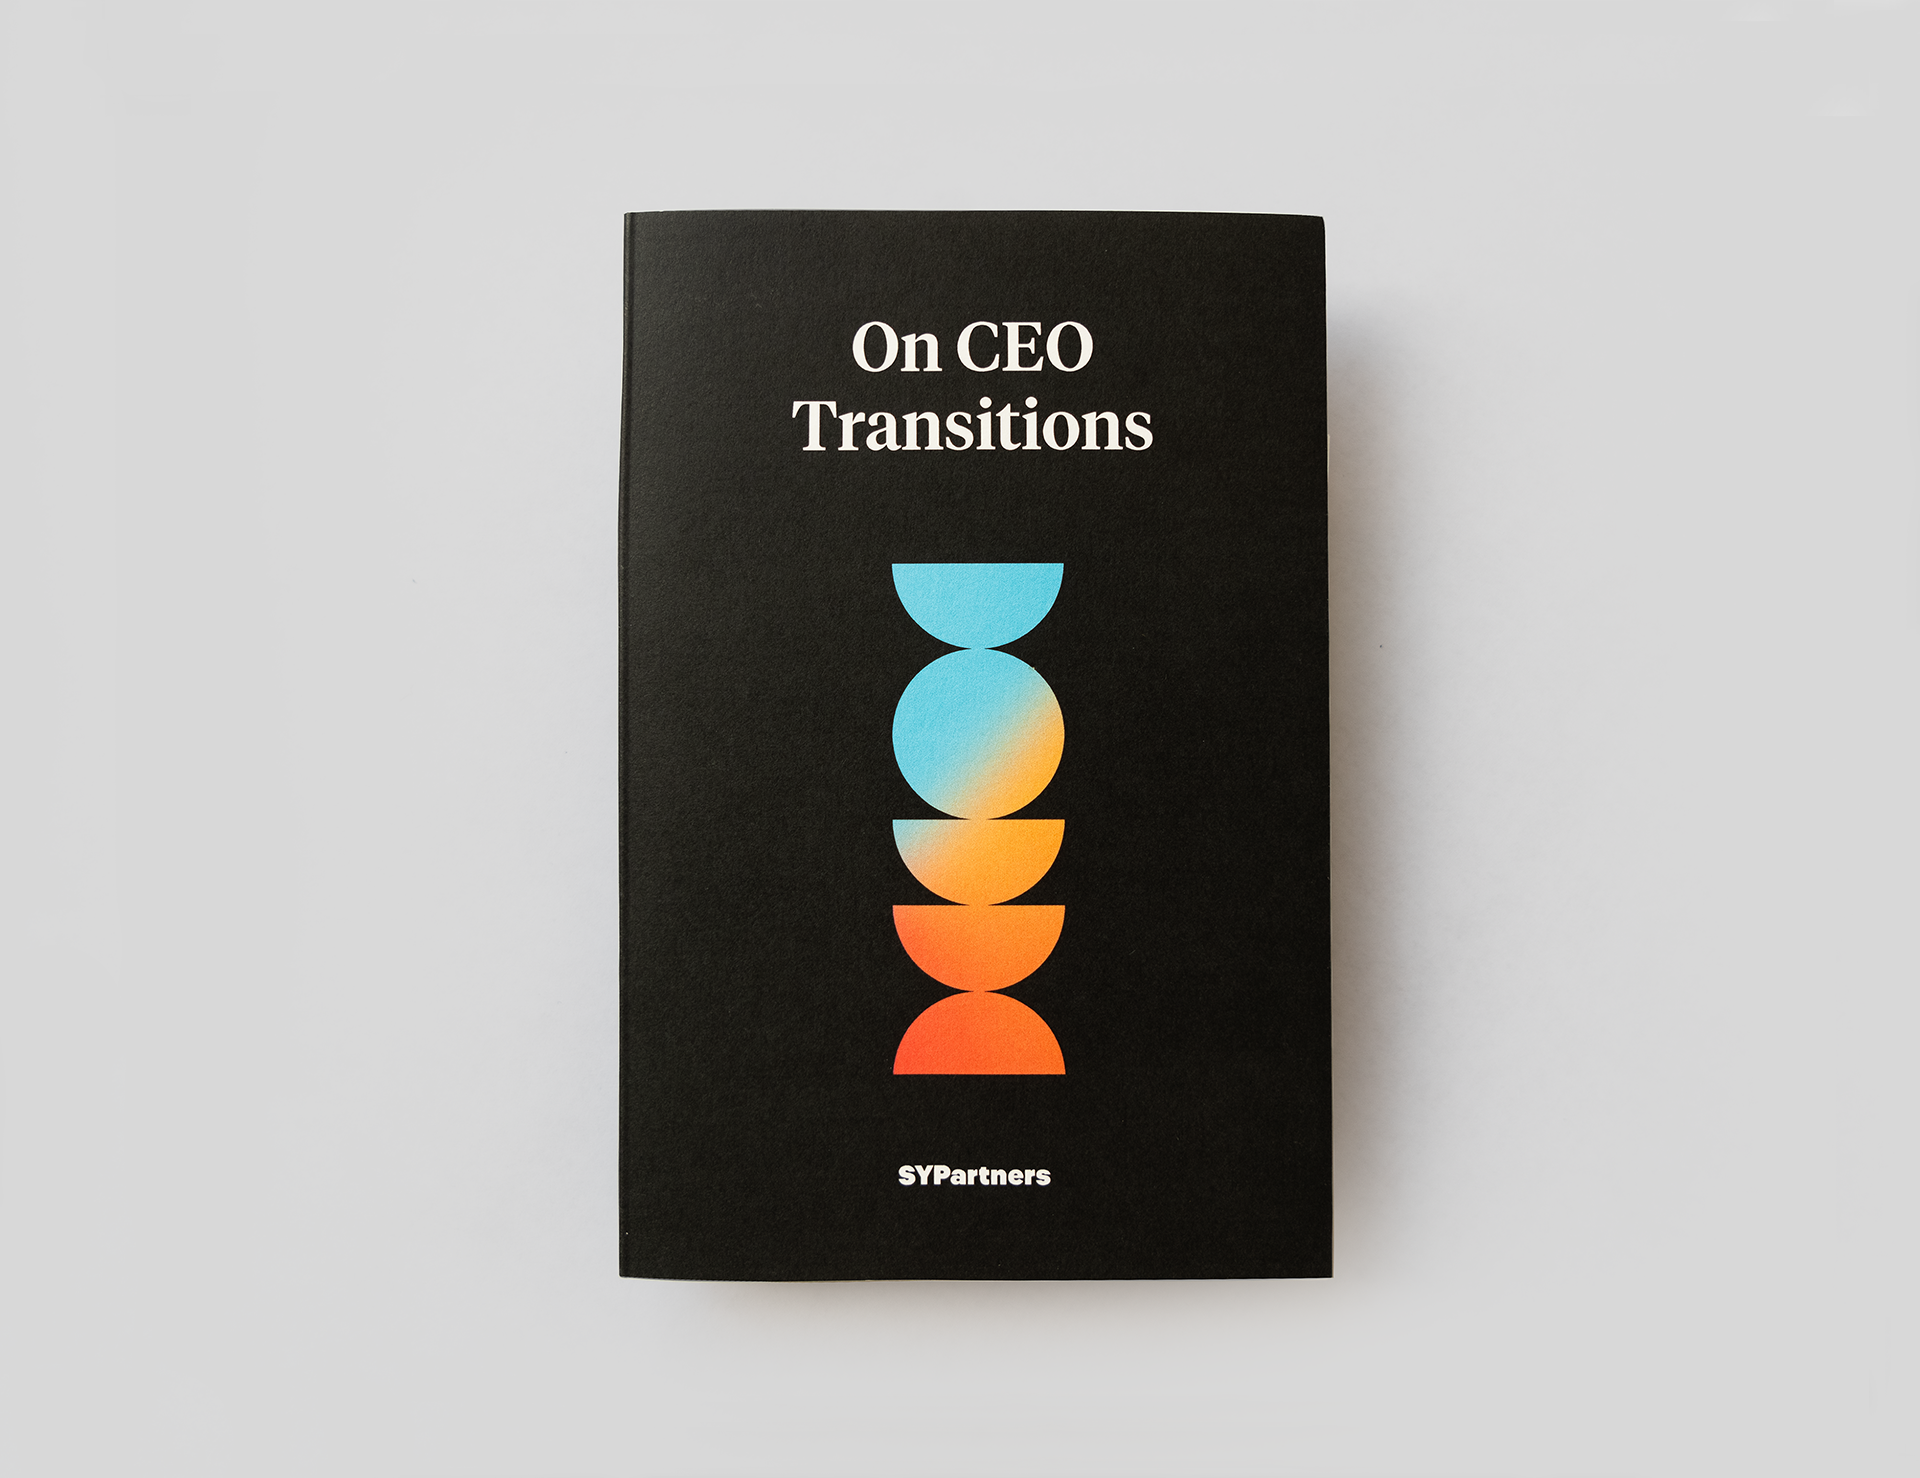 On CEO transitions book